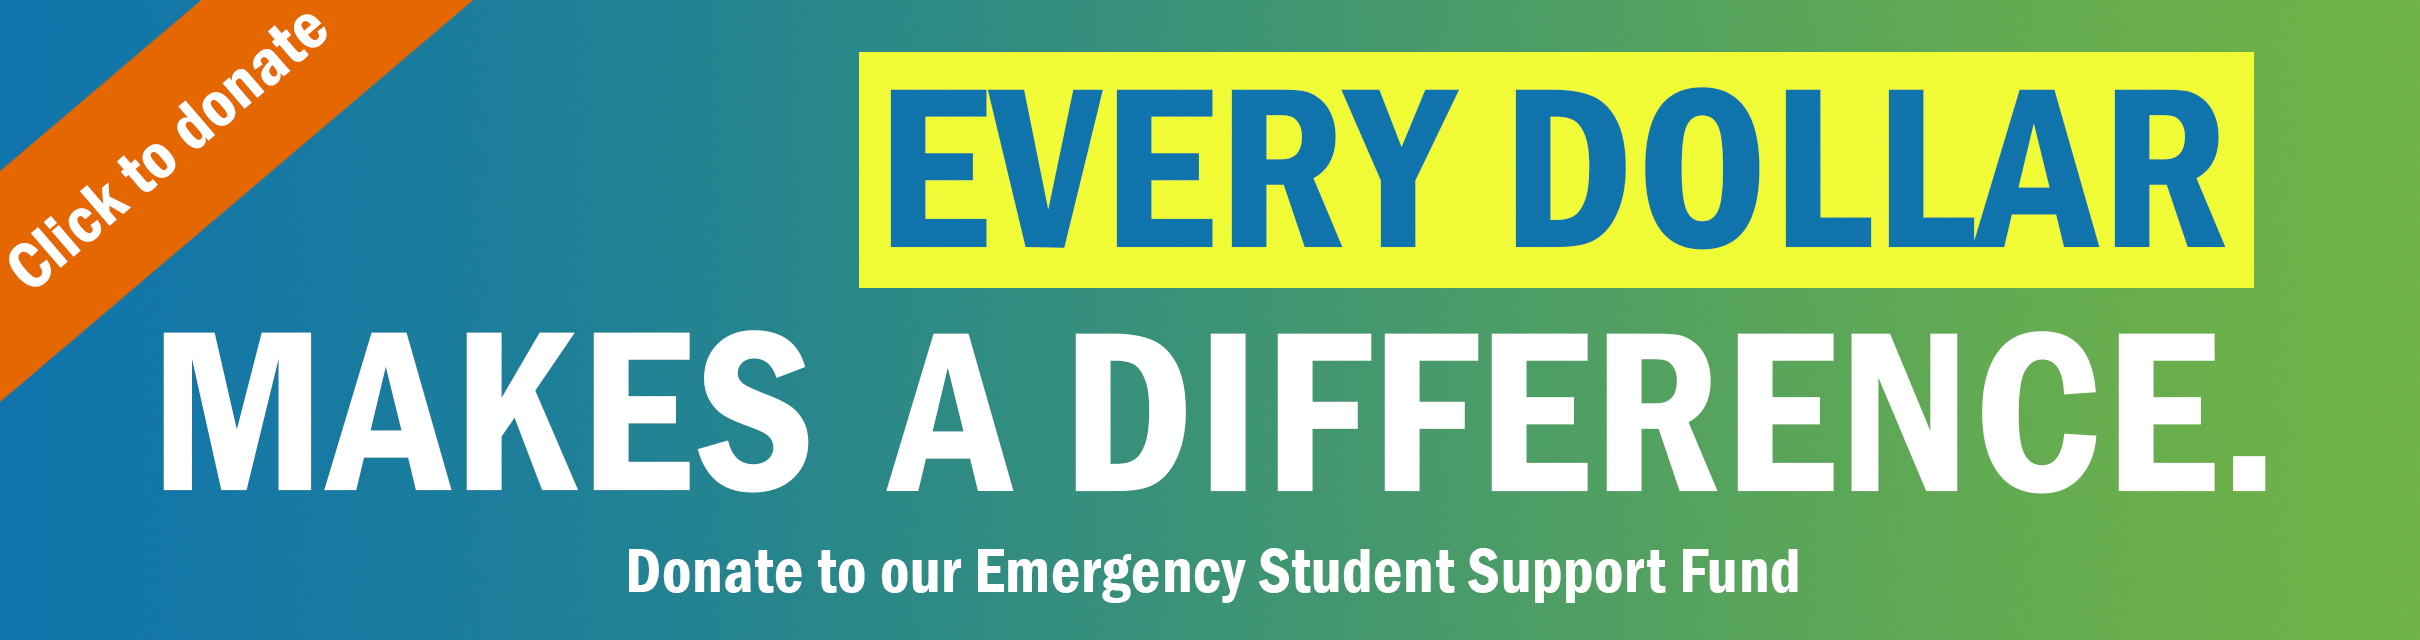 Every dollar makes a difference! Click here to donate to our Emergency Student Support Fund.